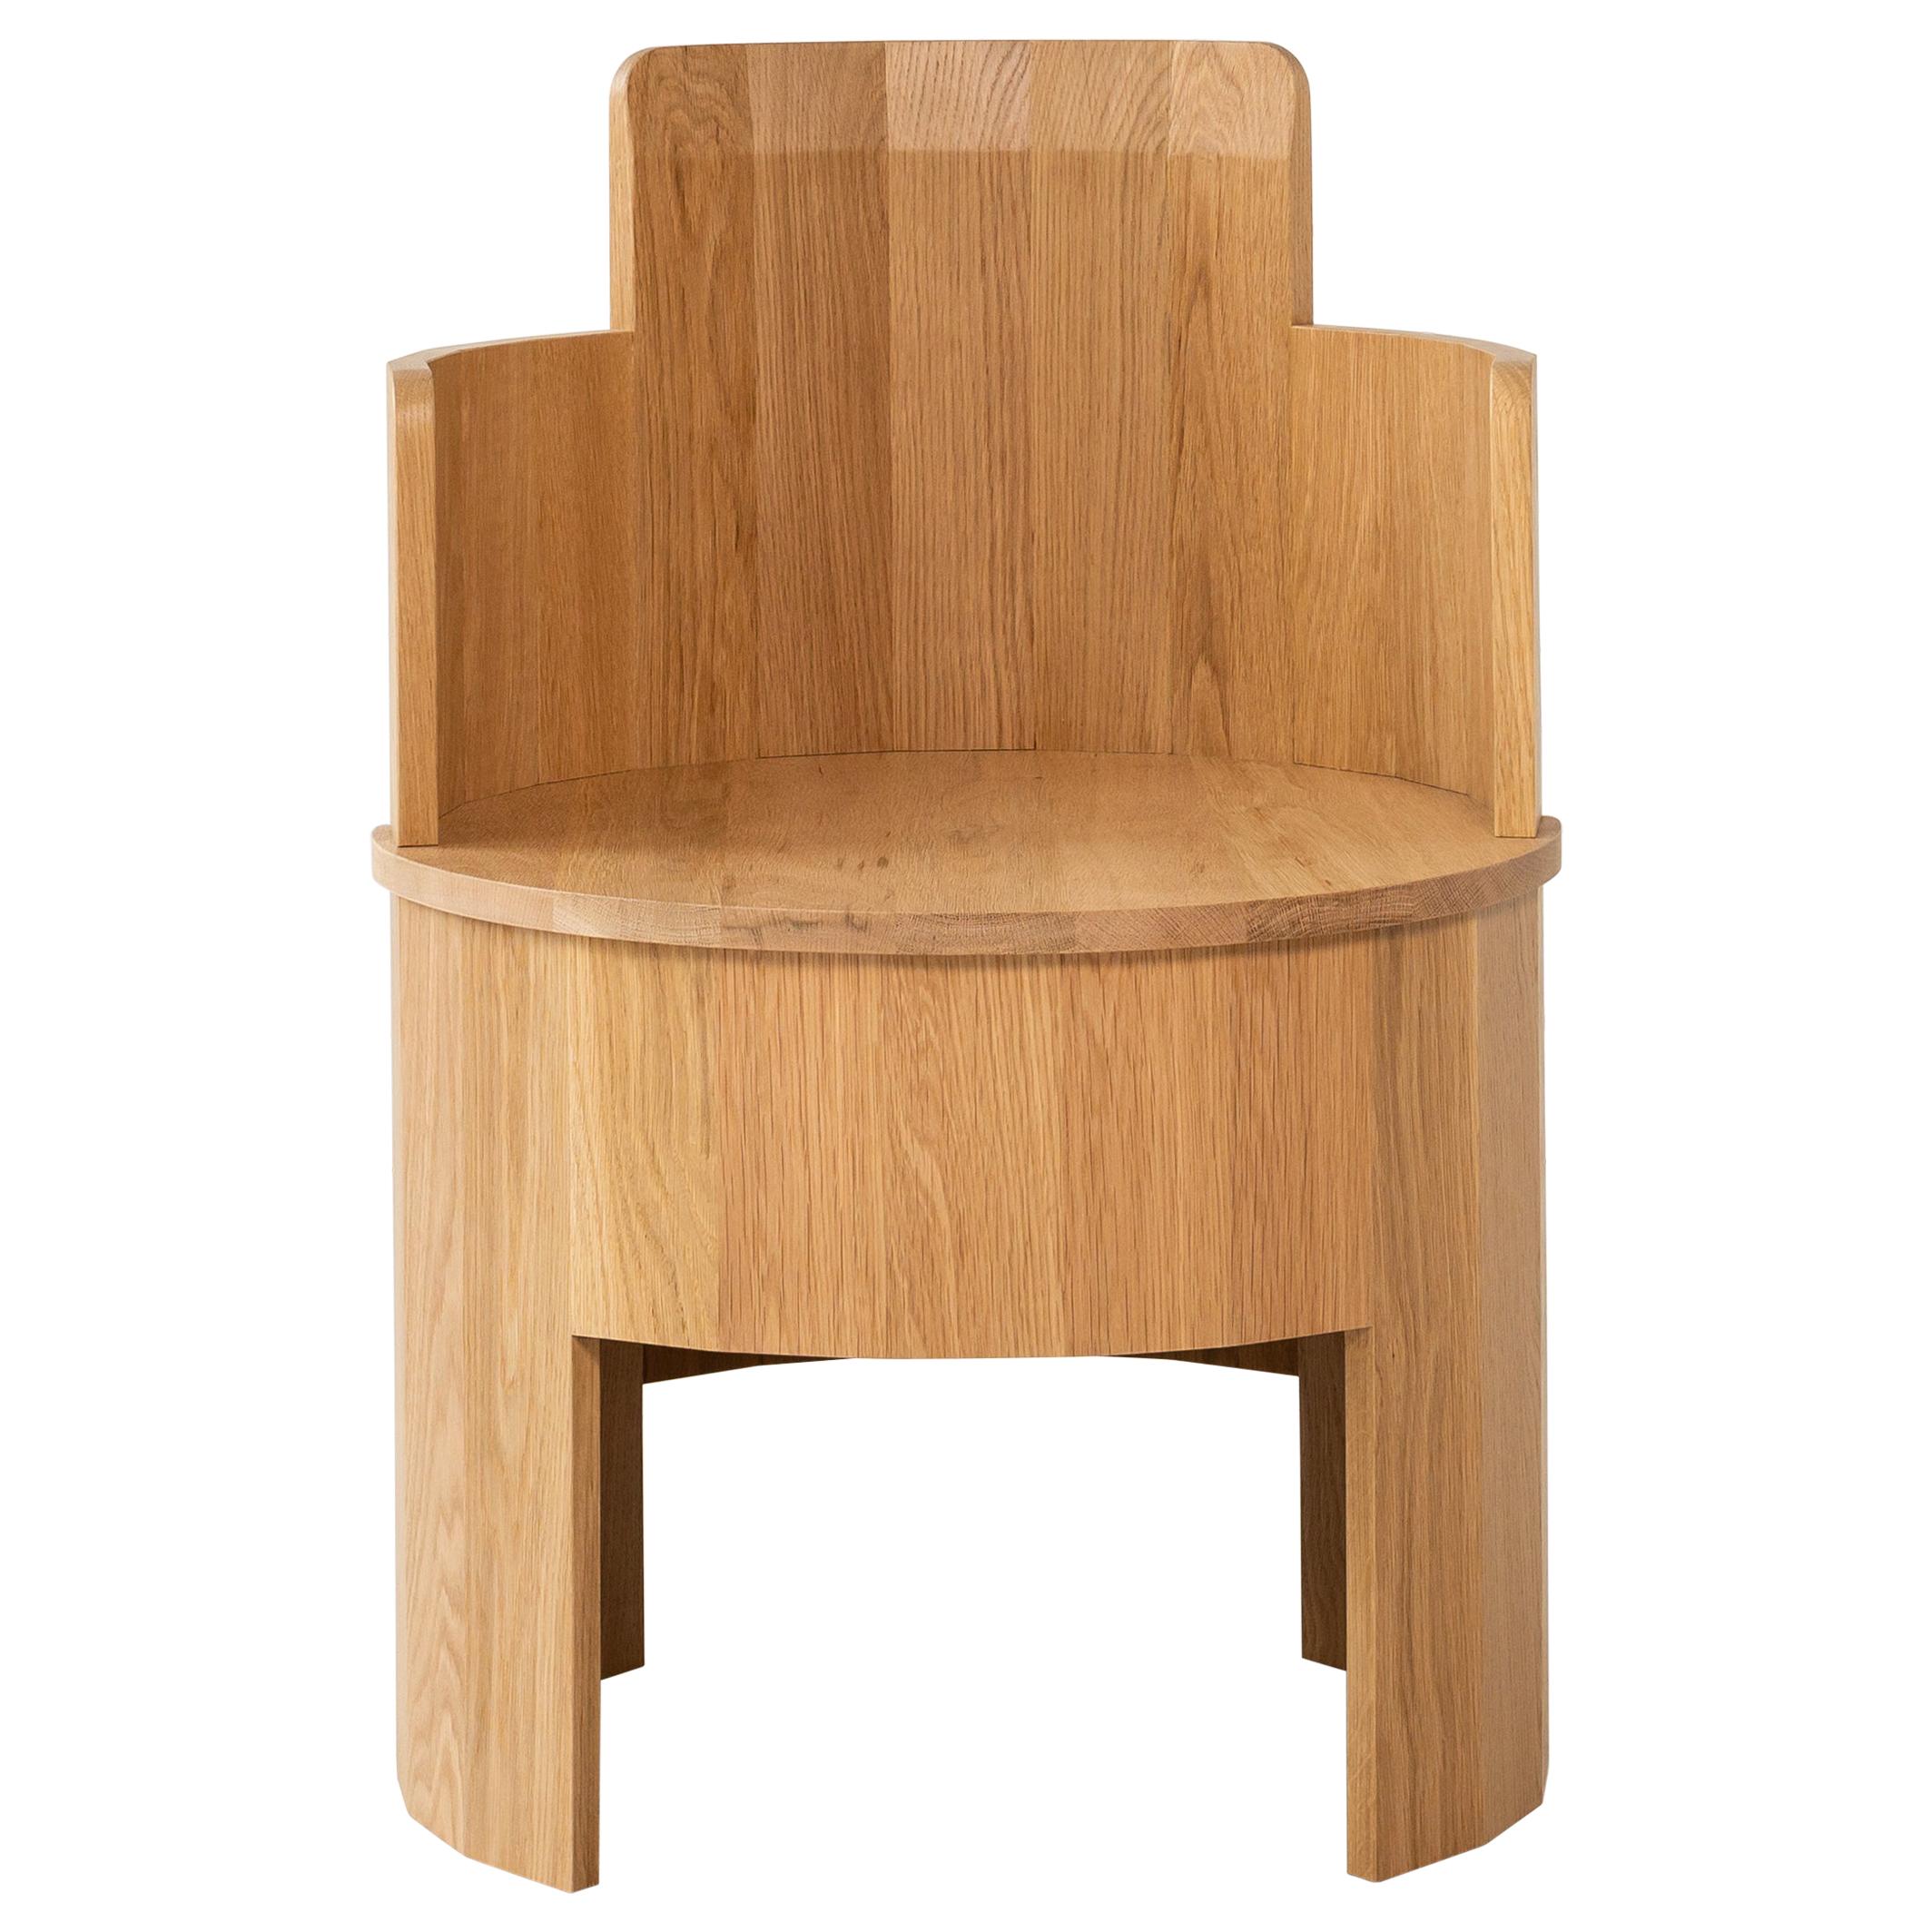 Contemporary White Oak Wood Cooperage Dining Chair by Fort Standard